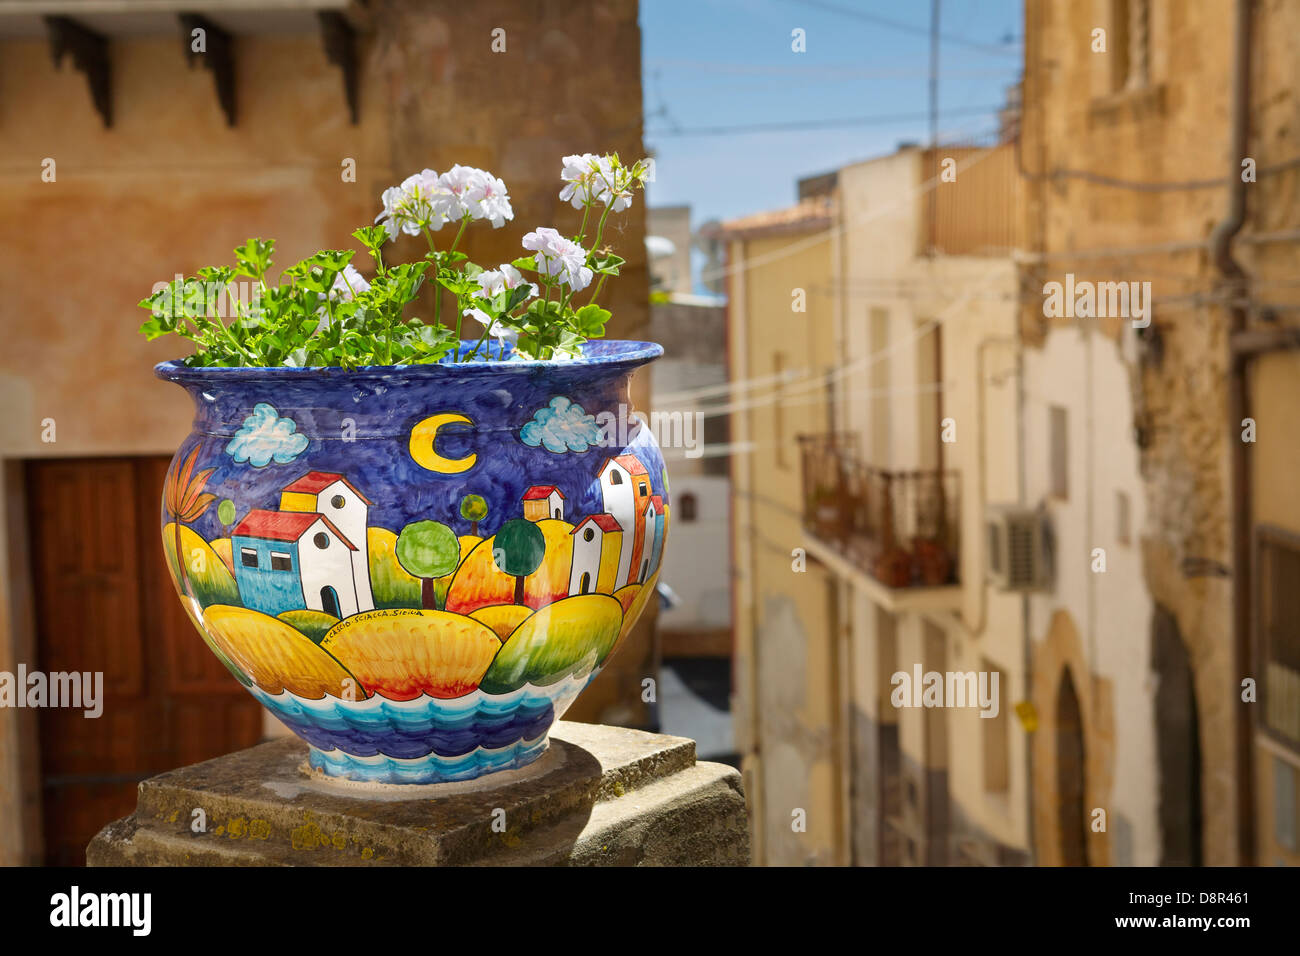 Sicilian ceramics as decoration in old town Sciacca, Sicily, Italy Stock Photo